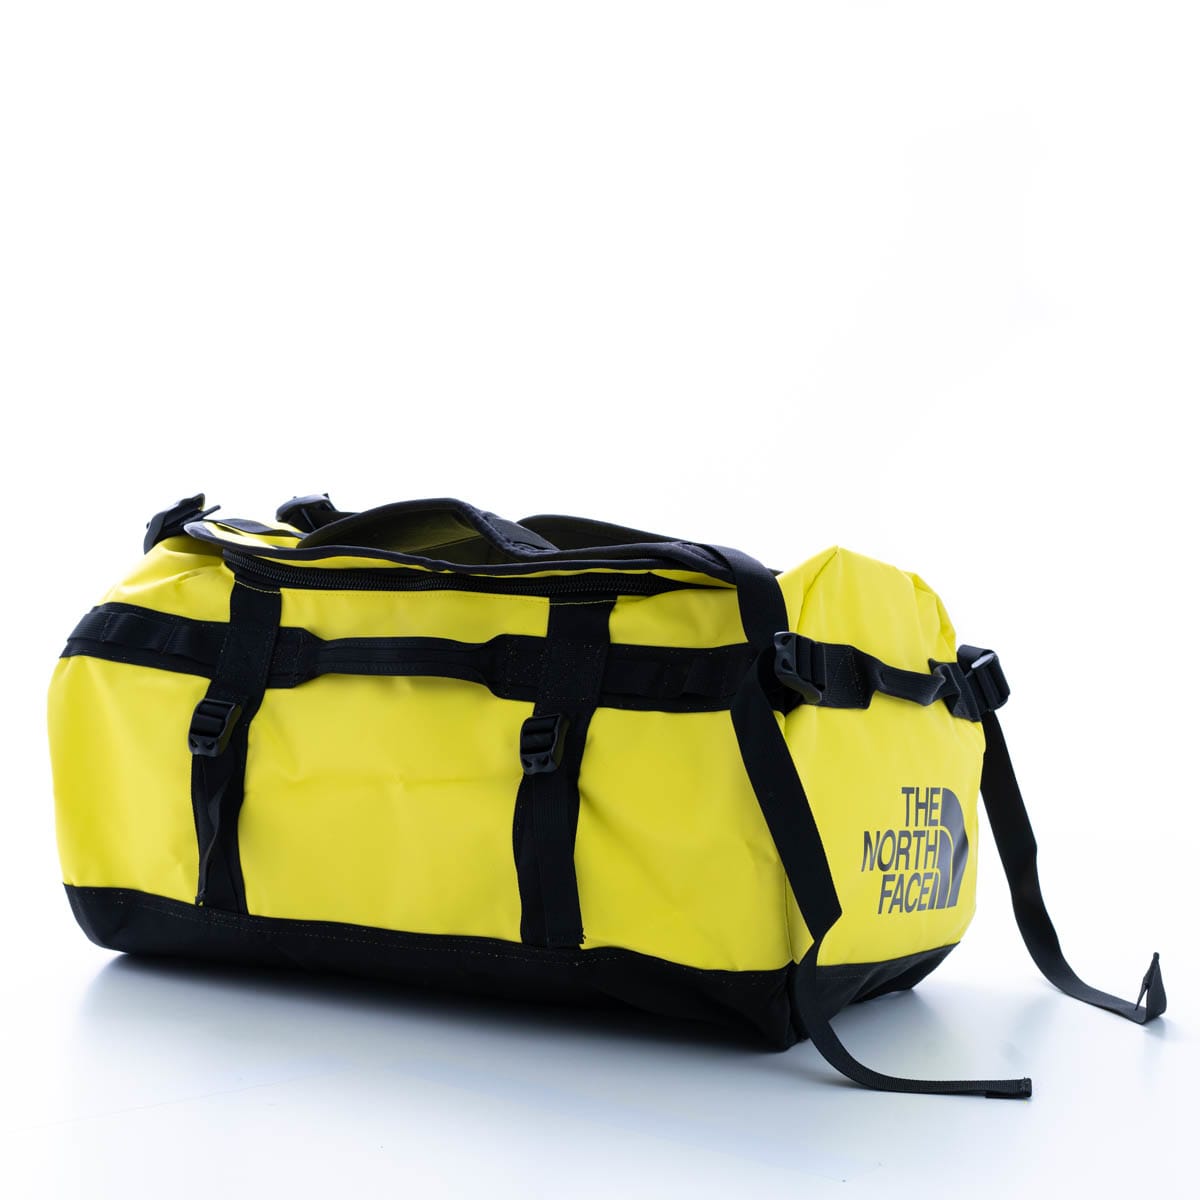 The North Face The North Face base Camp Bag